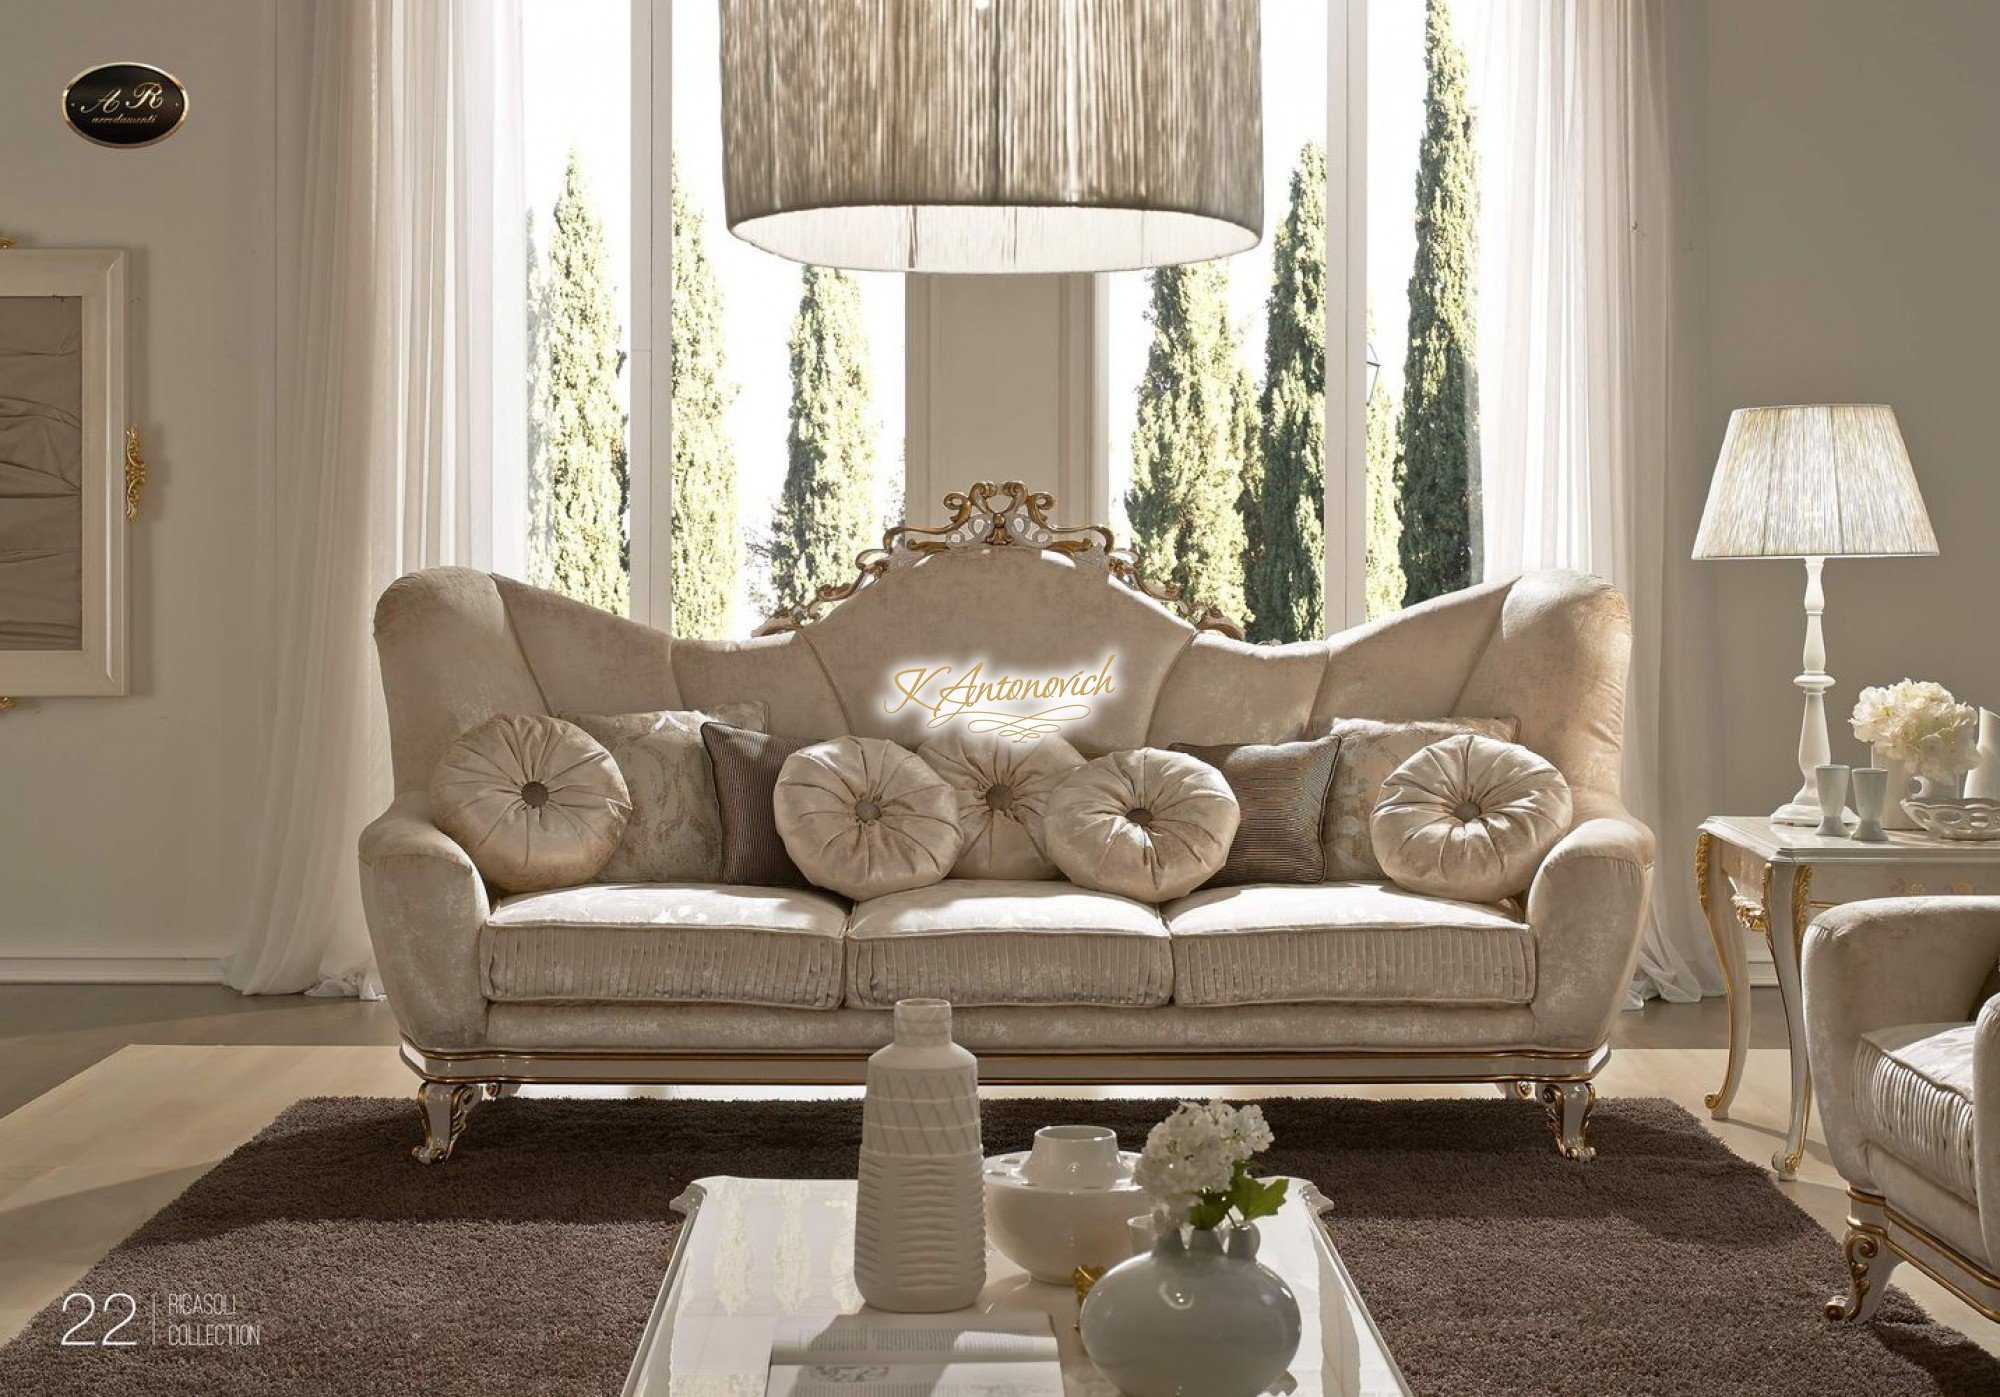 Living room furniture in the Italian style - luxury ...
